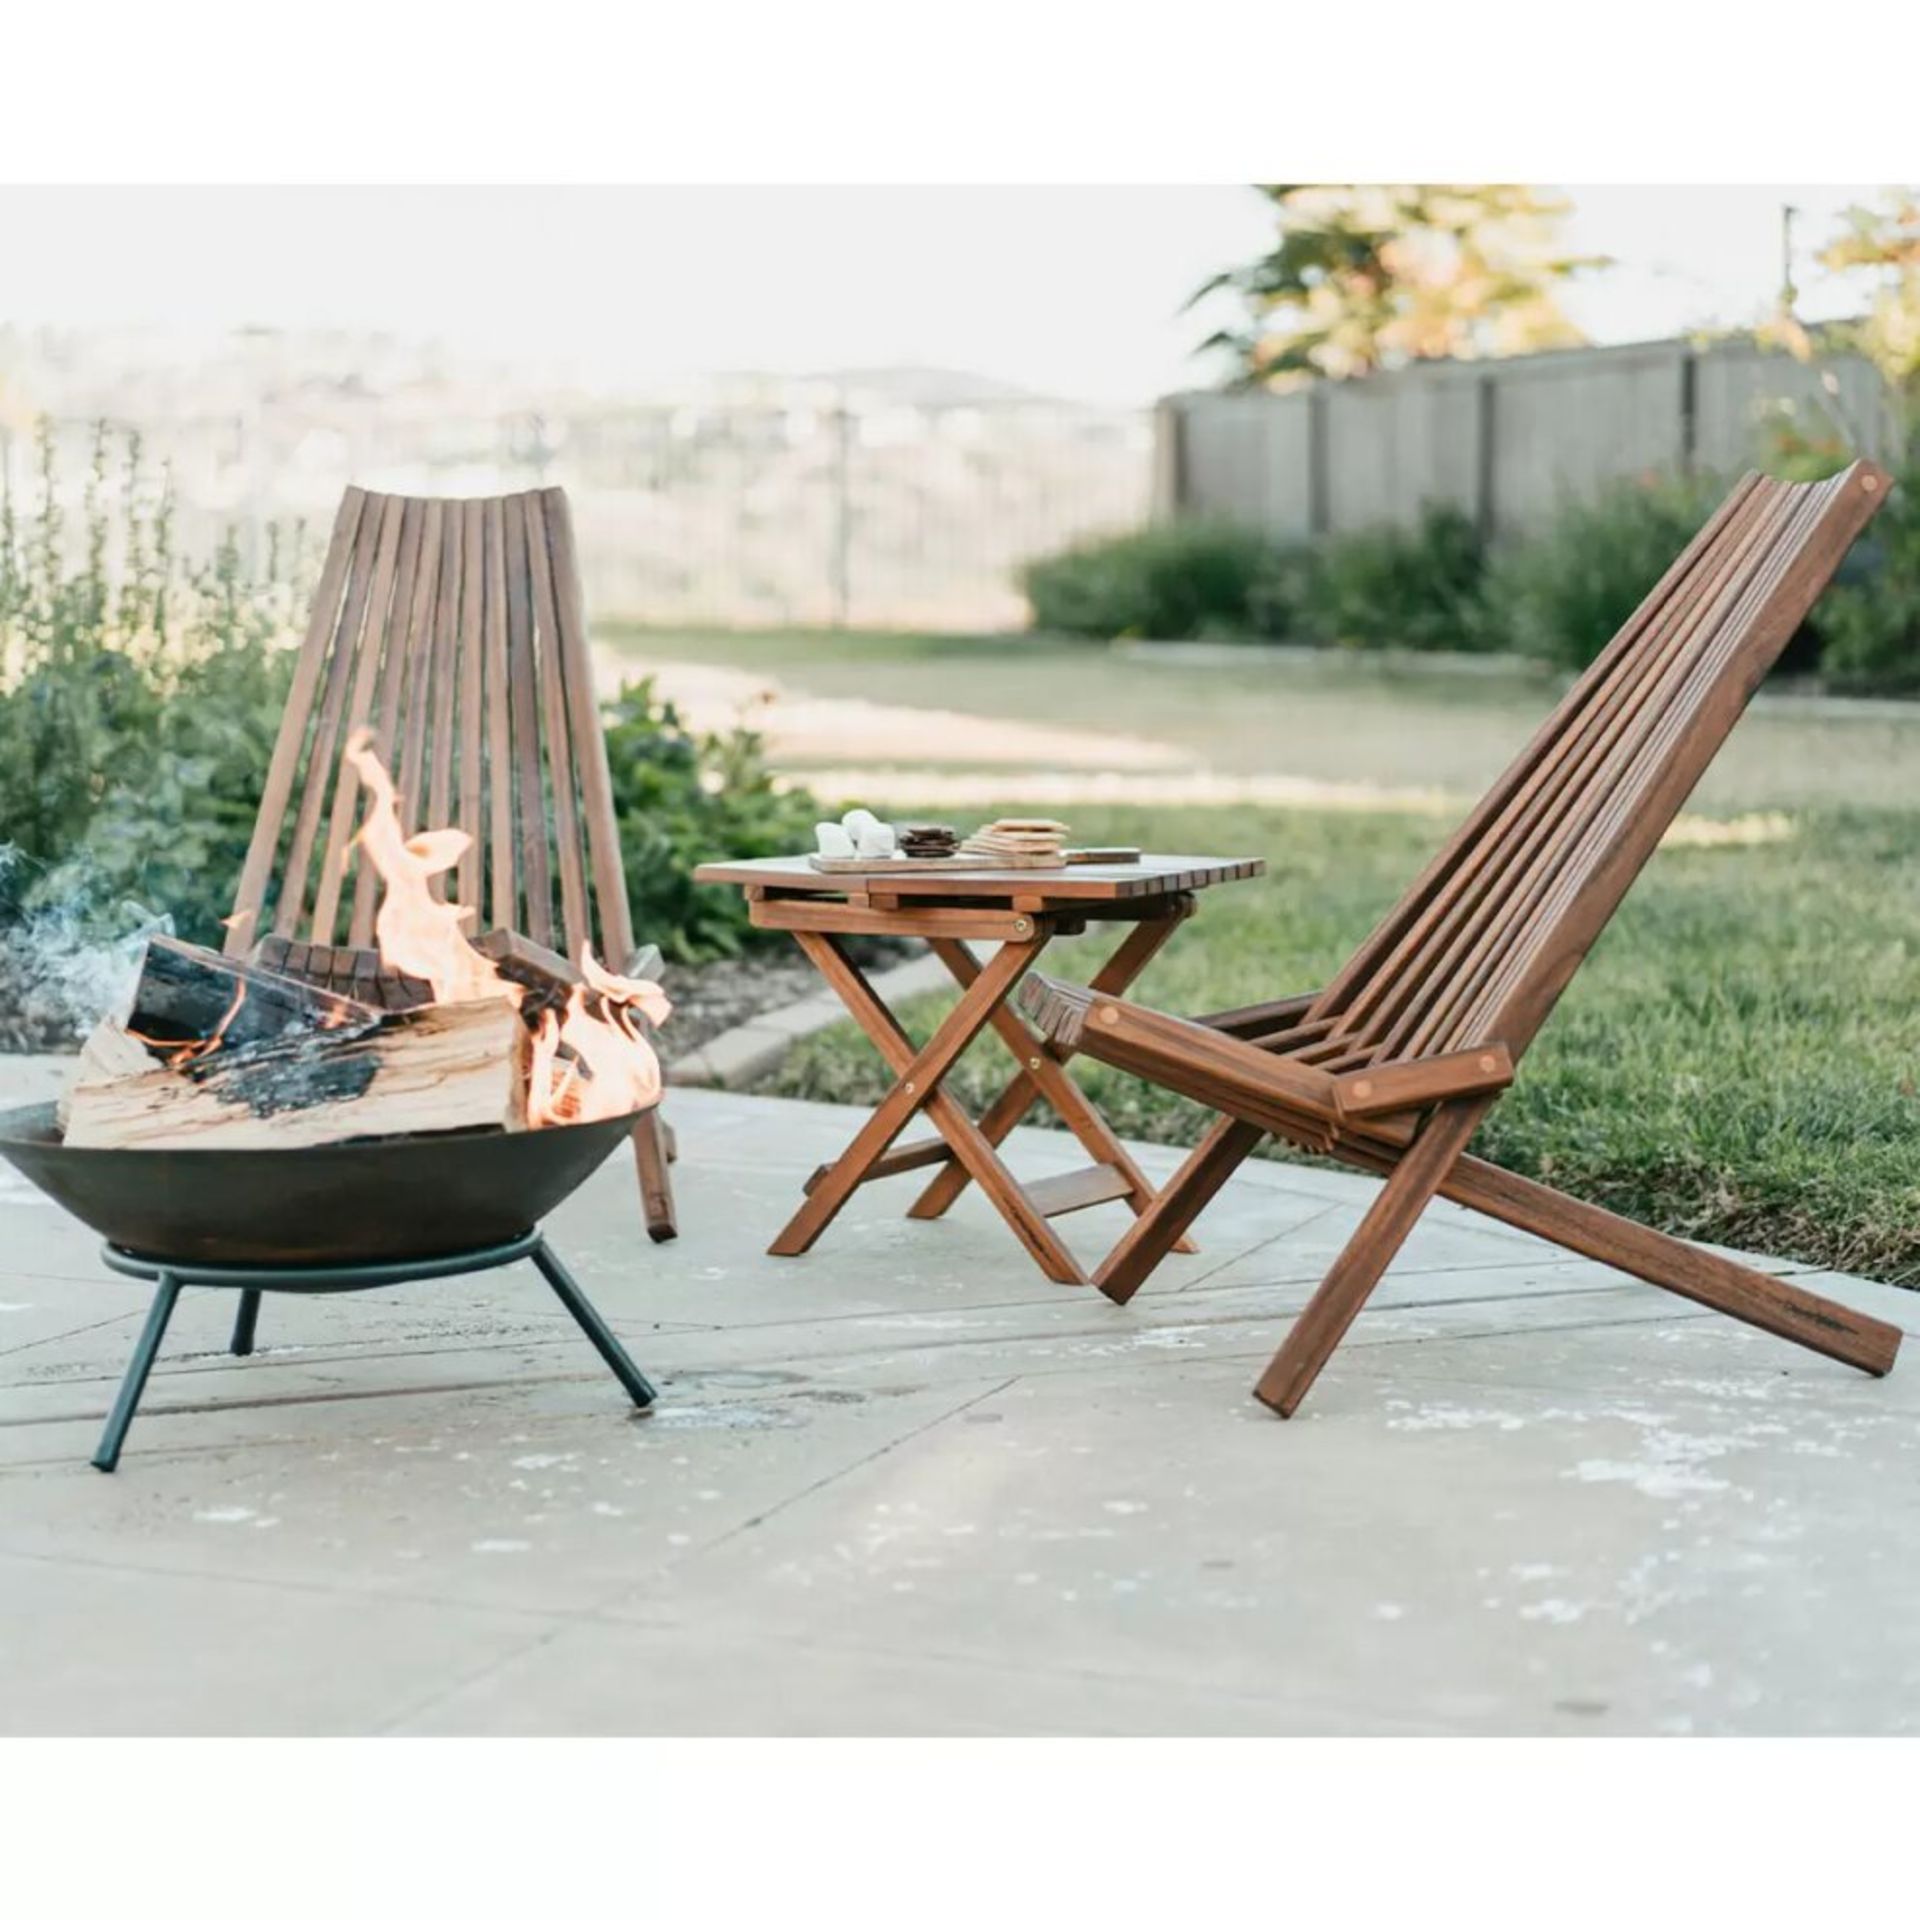 1 MELINO WOODEN OUTDOOR FOLDING CHAIRS AND SMAL TABLE RRP Â£149 (PICTURES FOR ILLUSTRATION